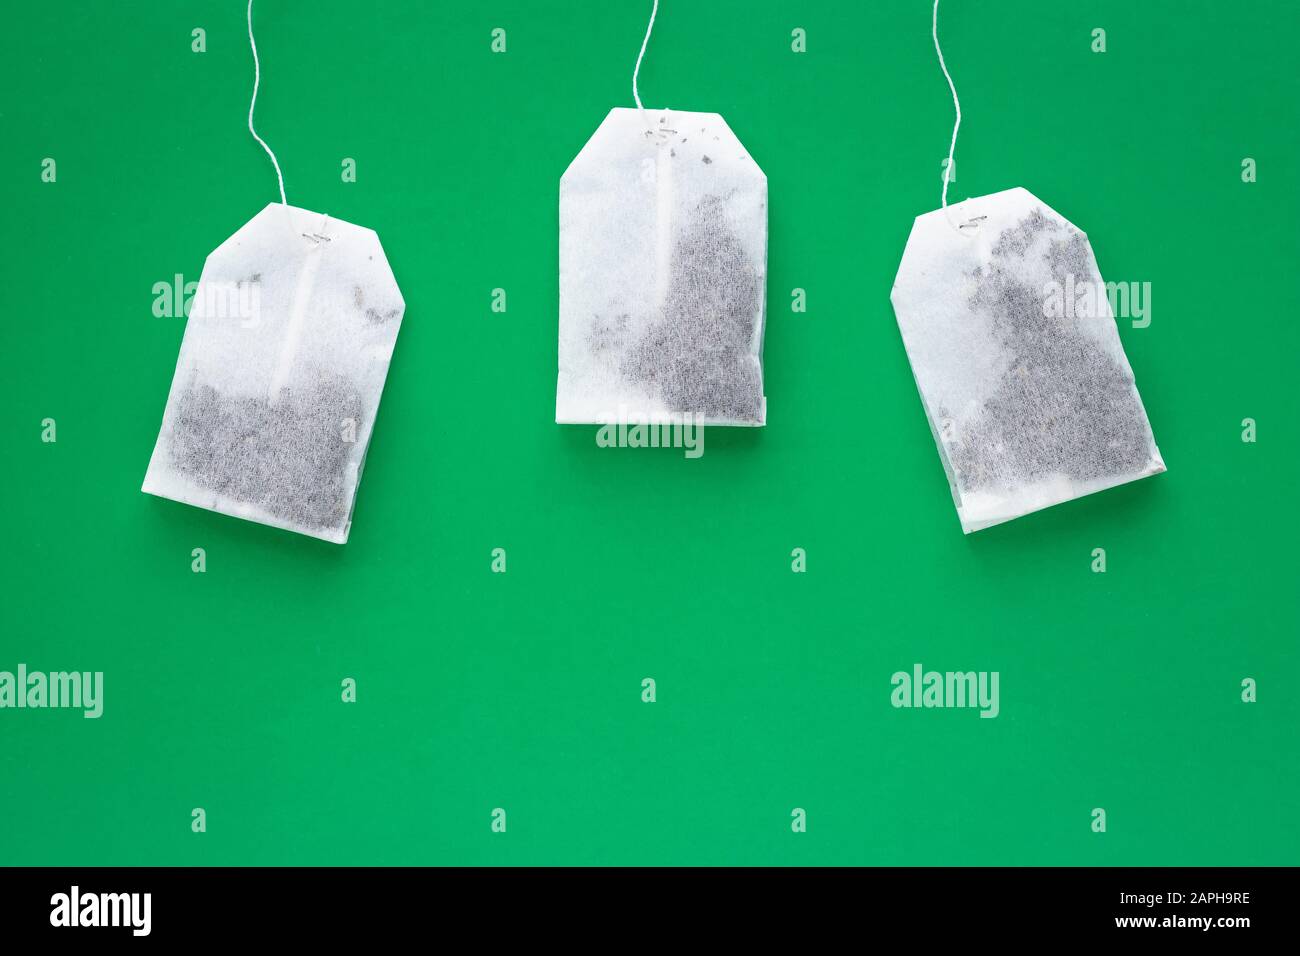 Three white tea bag on green background with copy space Stock Photo